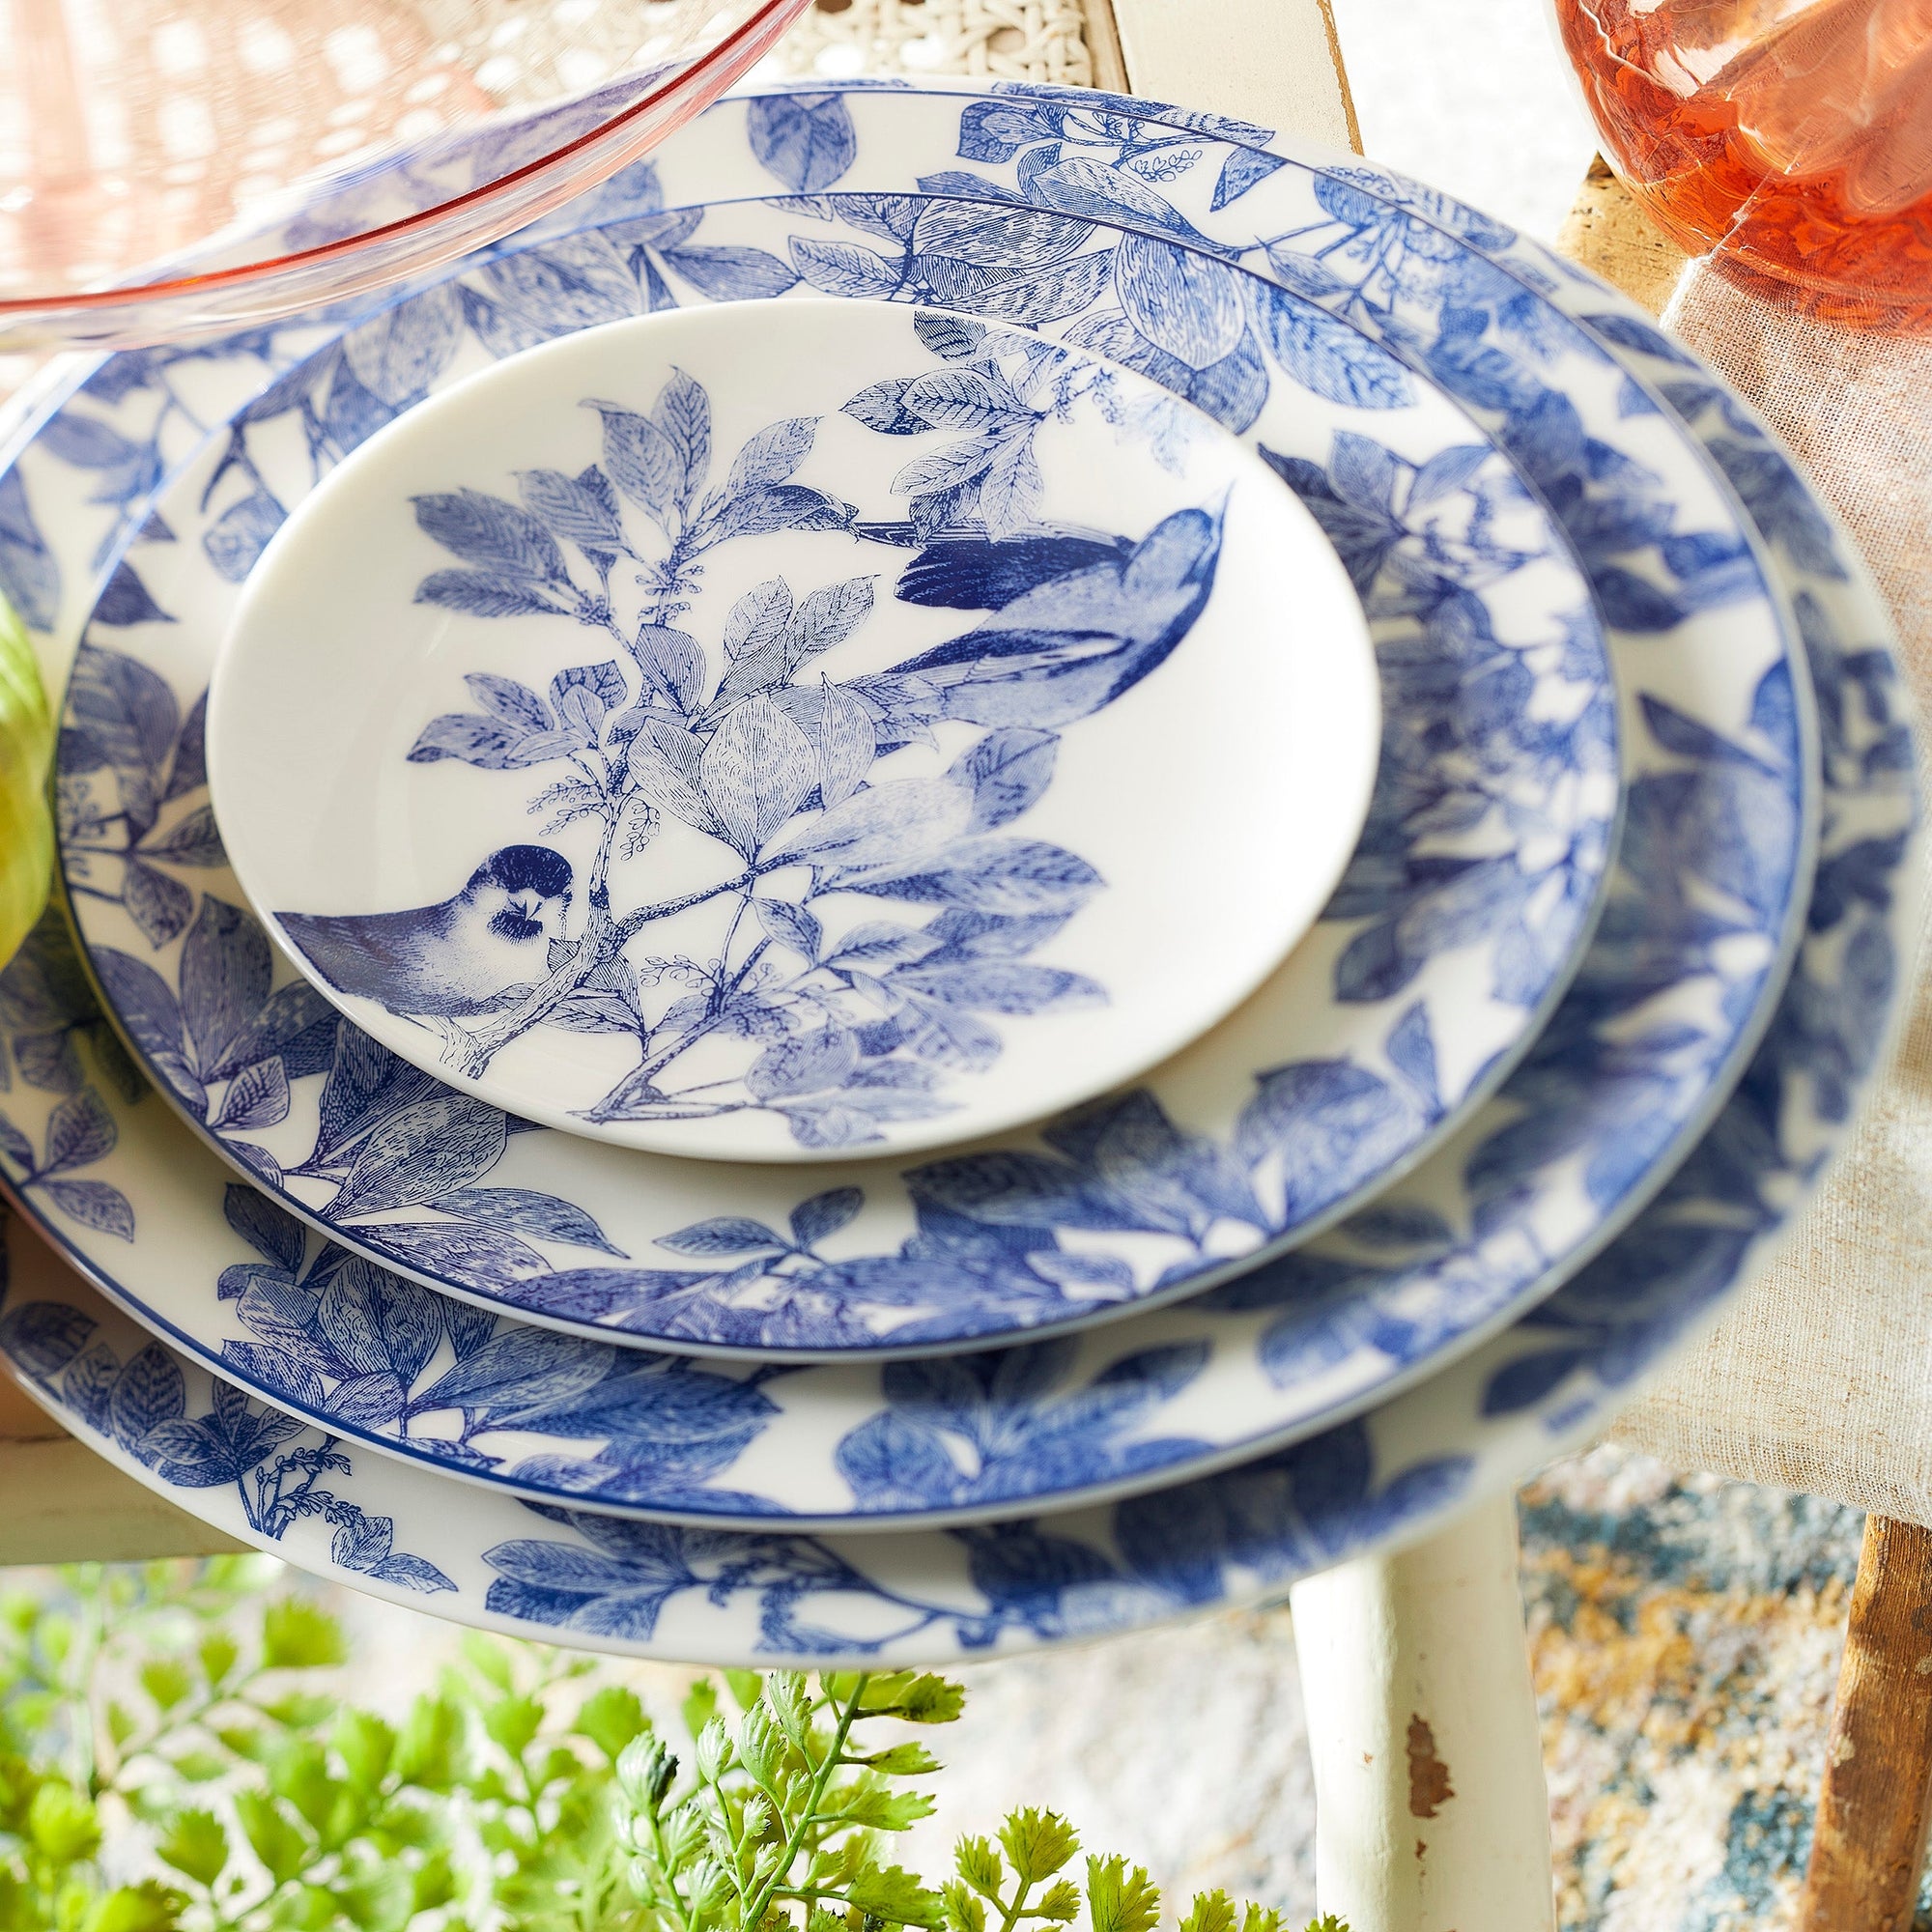 A white ceramic plate featuring blue floral and leafy botanical details along the rim, the Arbor Rimmed Charger Plate by Caskata Artisanal Home.